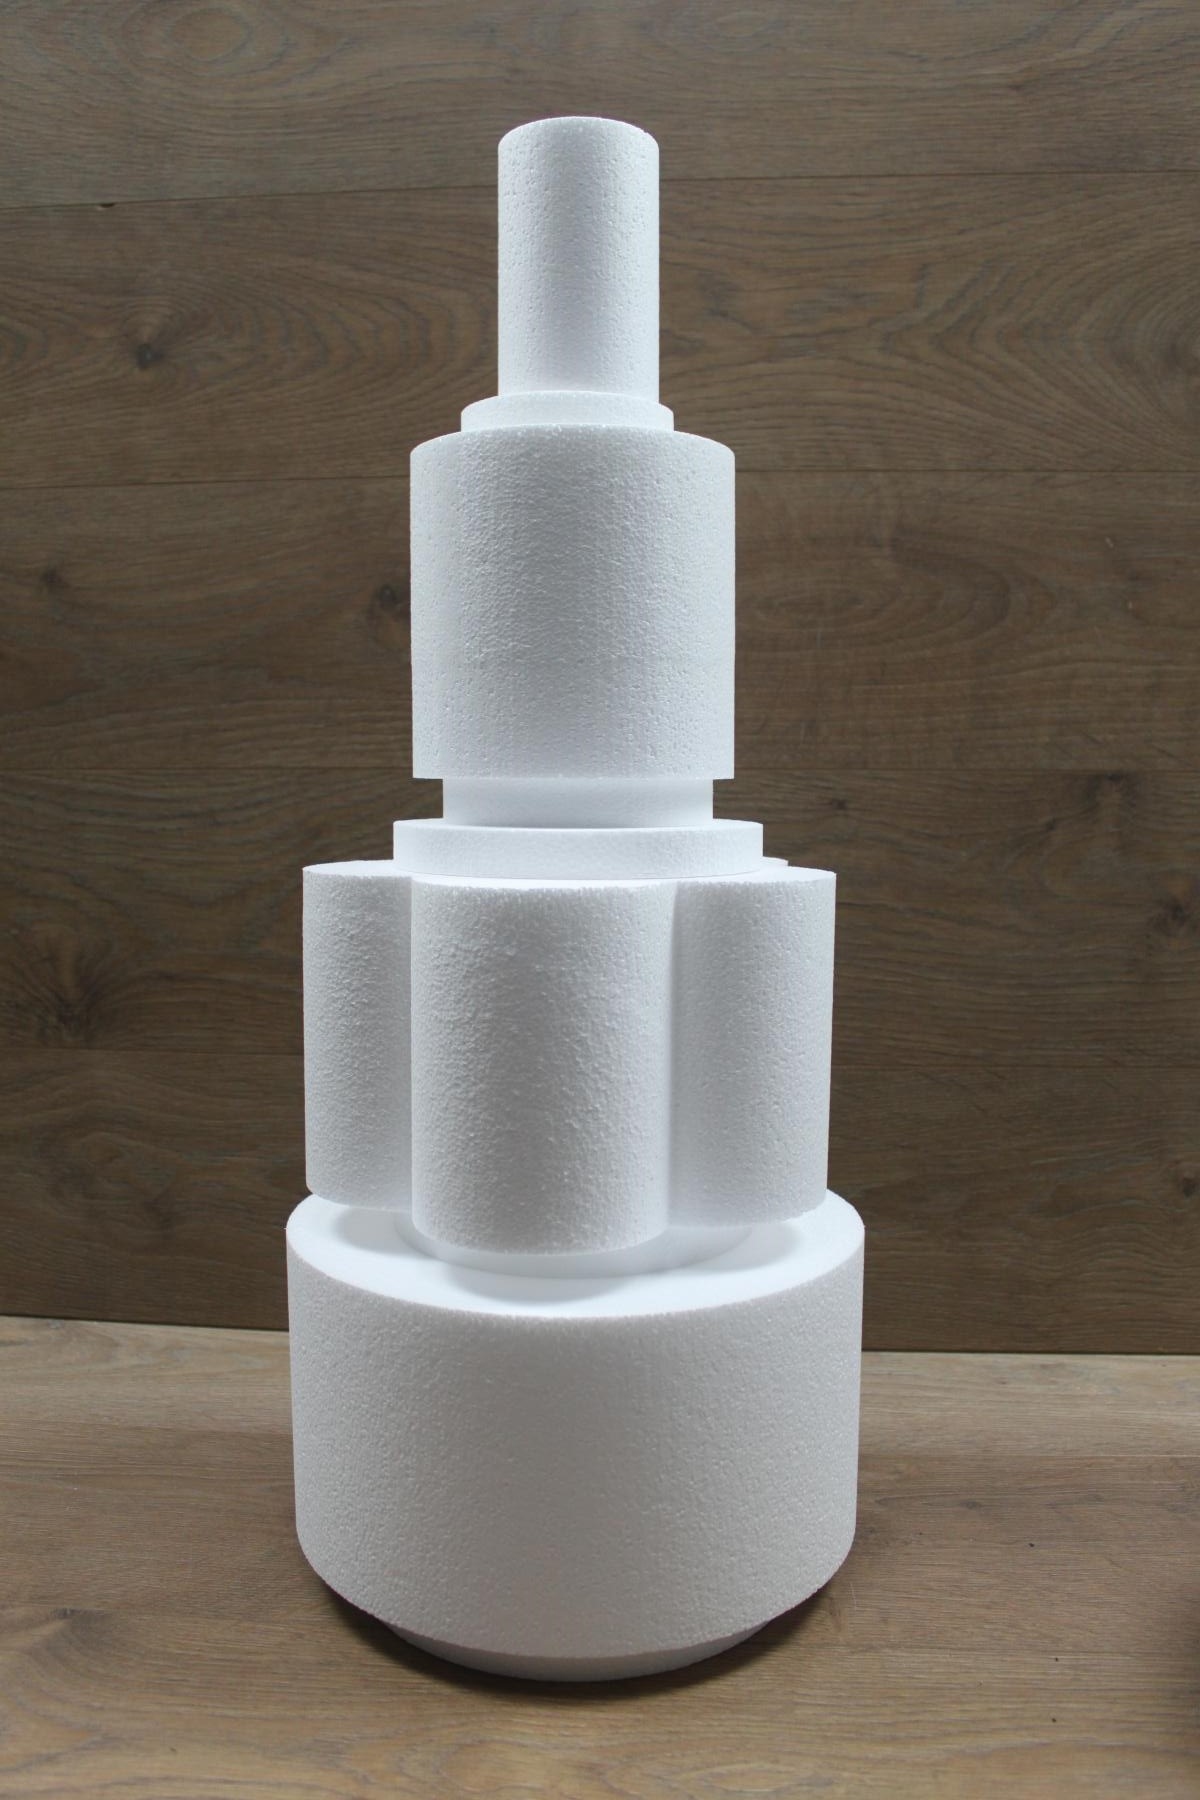 Set of 4 Round Foam Cake Dummies in Varying Sizes for 16